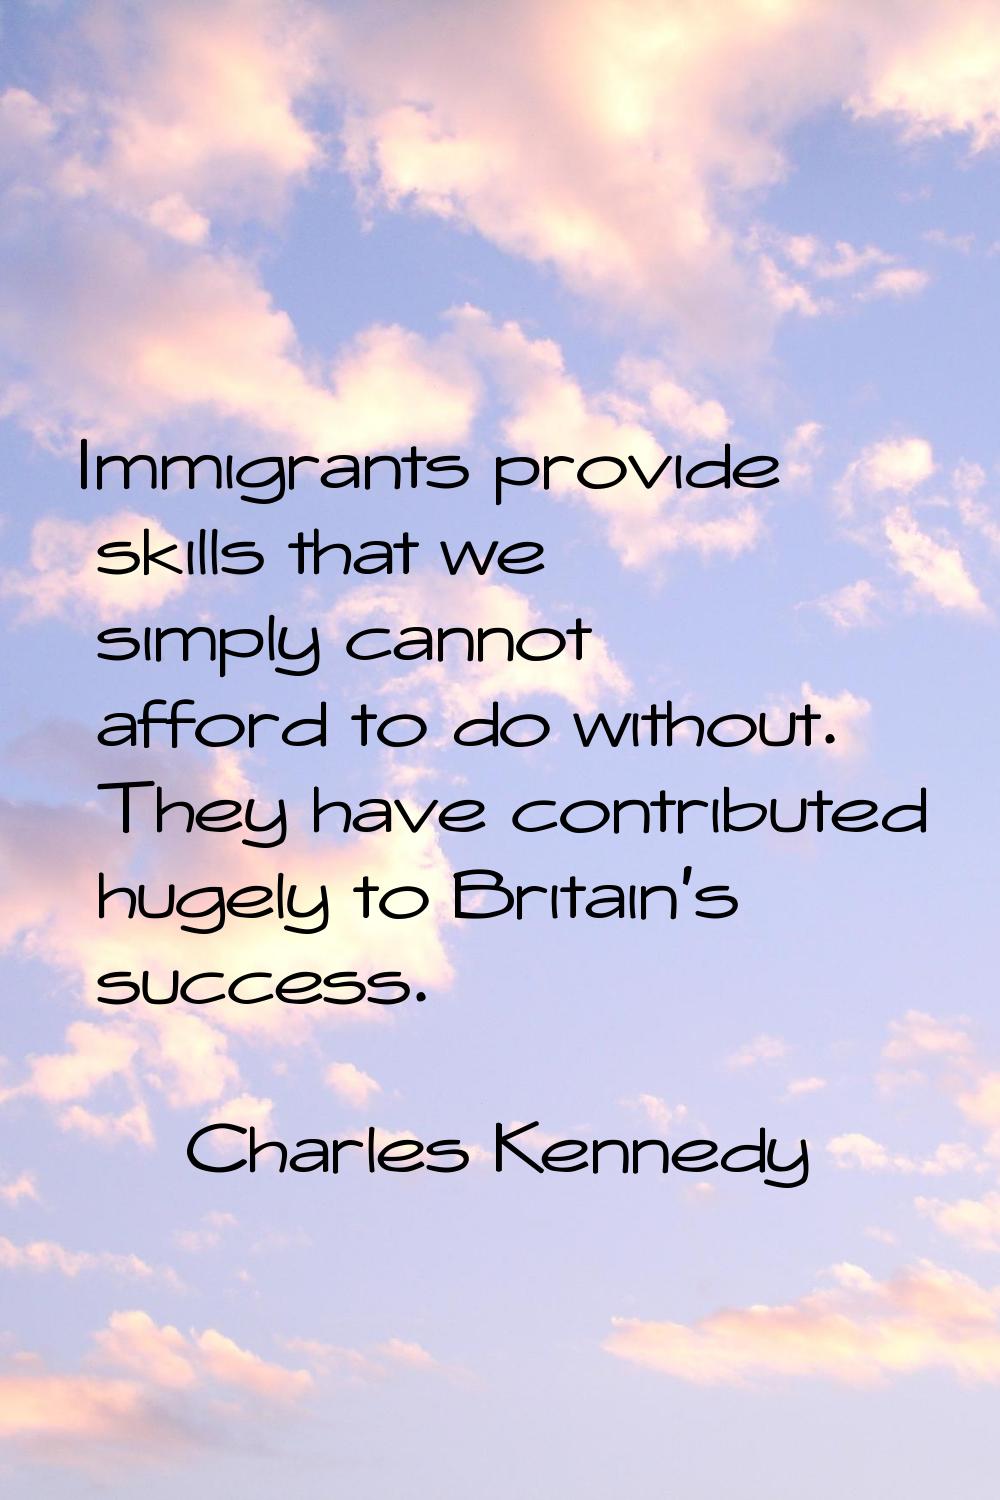 Immigrants provide skills that we simply cannot afford to do without. They have contributed hugely 